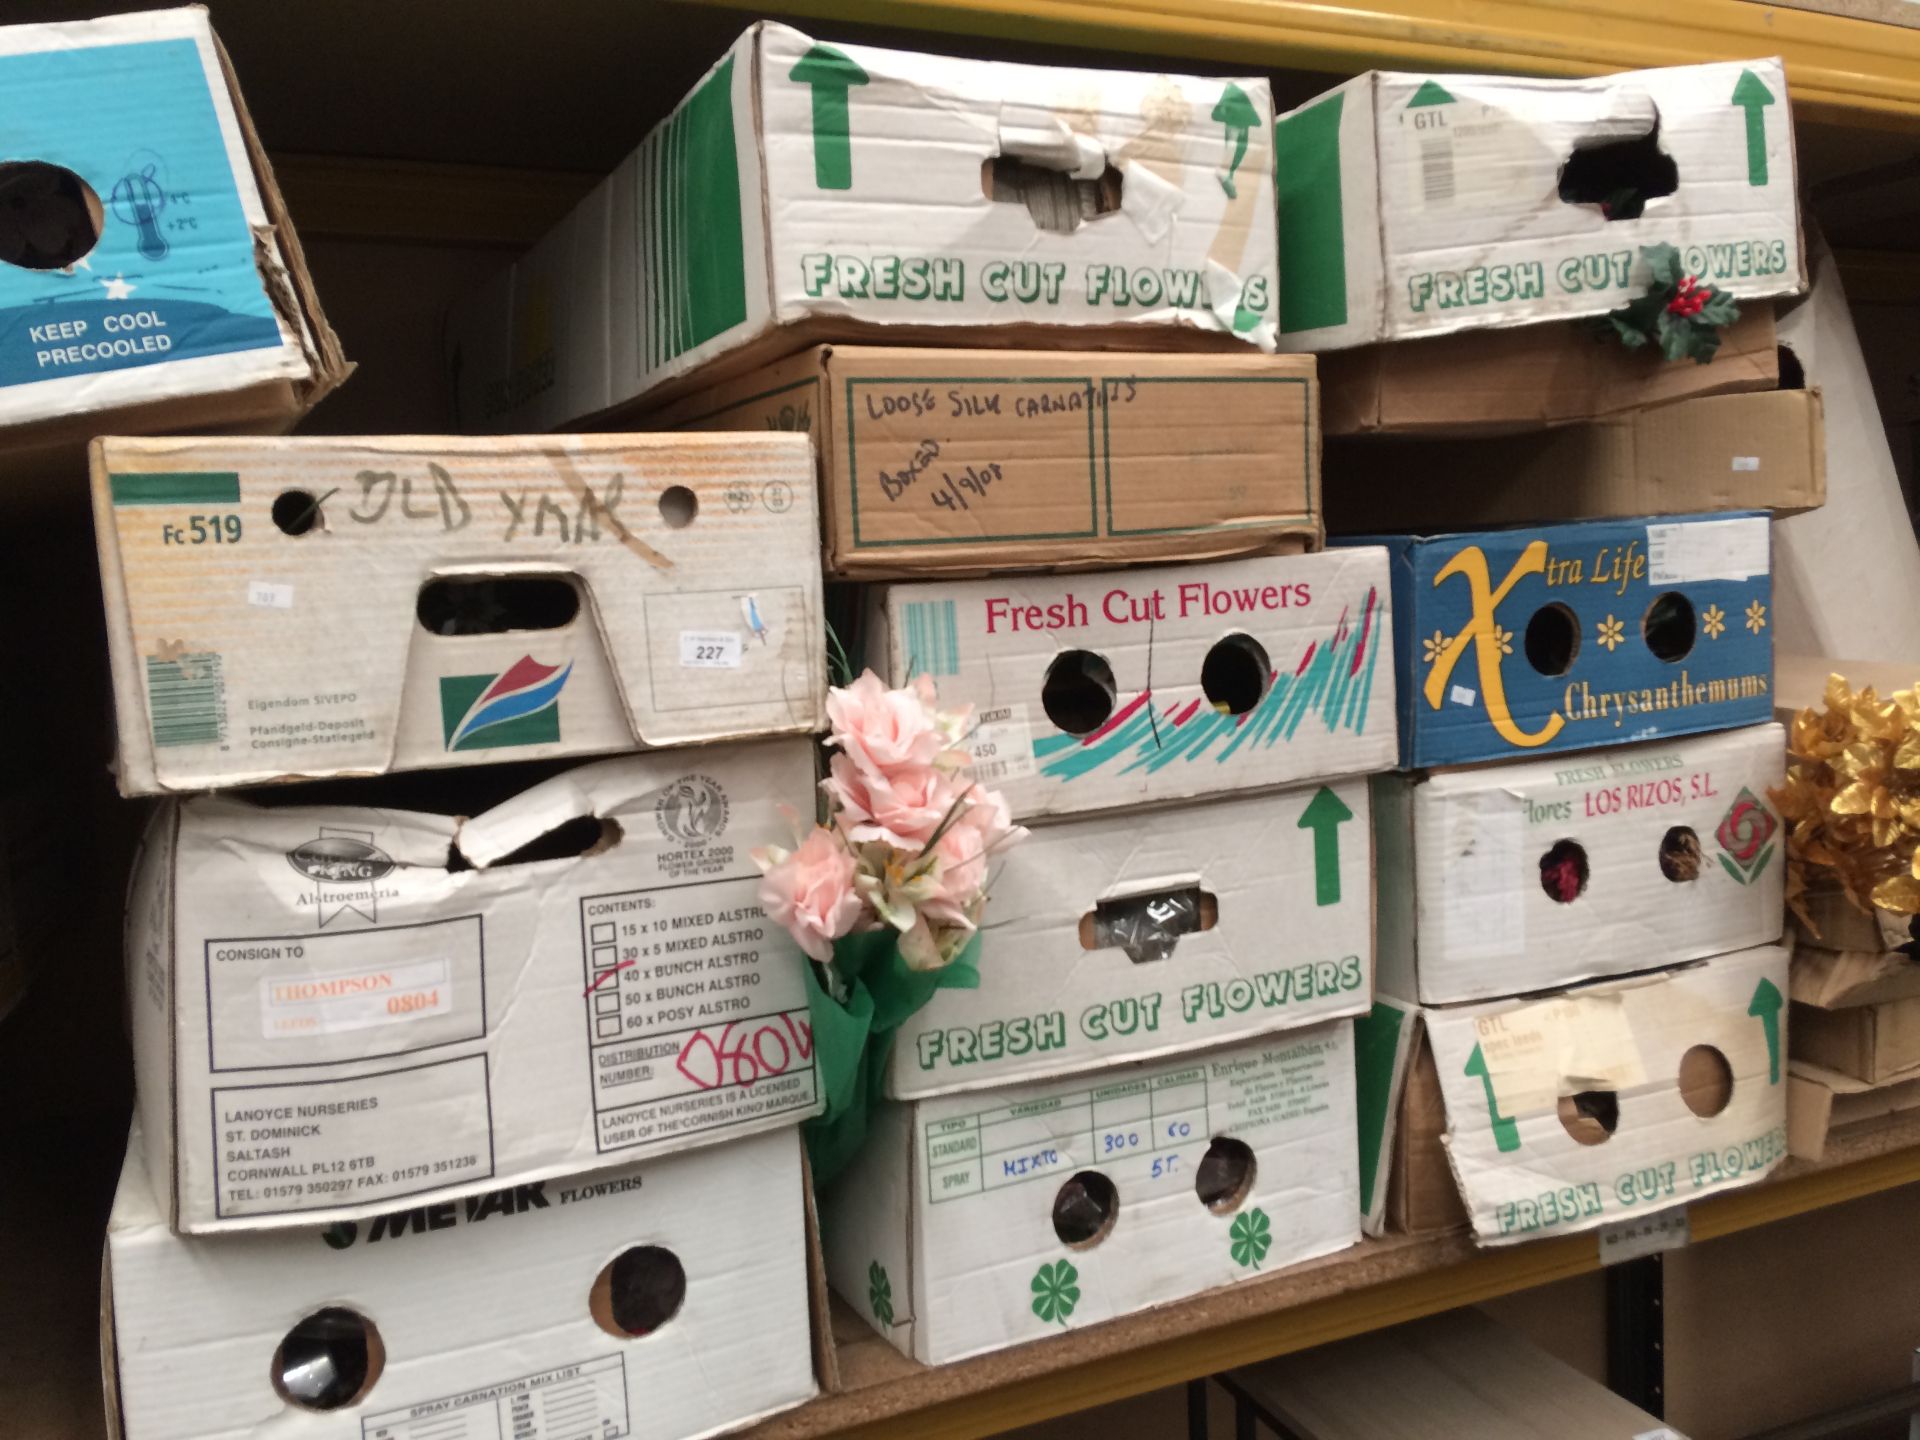 Contents to bay - 30 x boxes containing a large quantity of artificial flowers